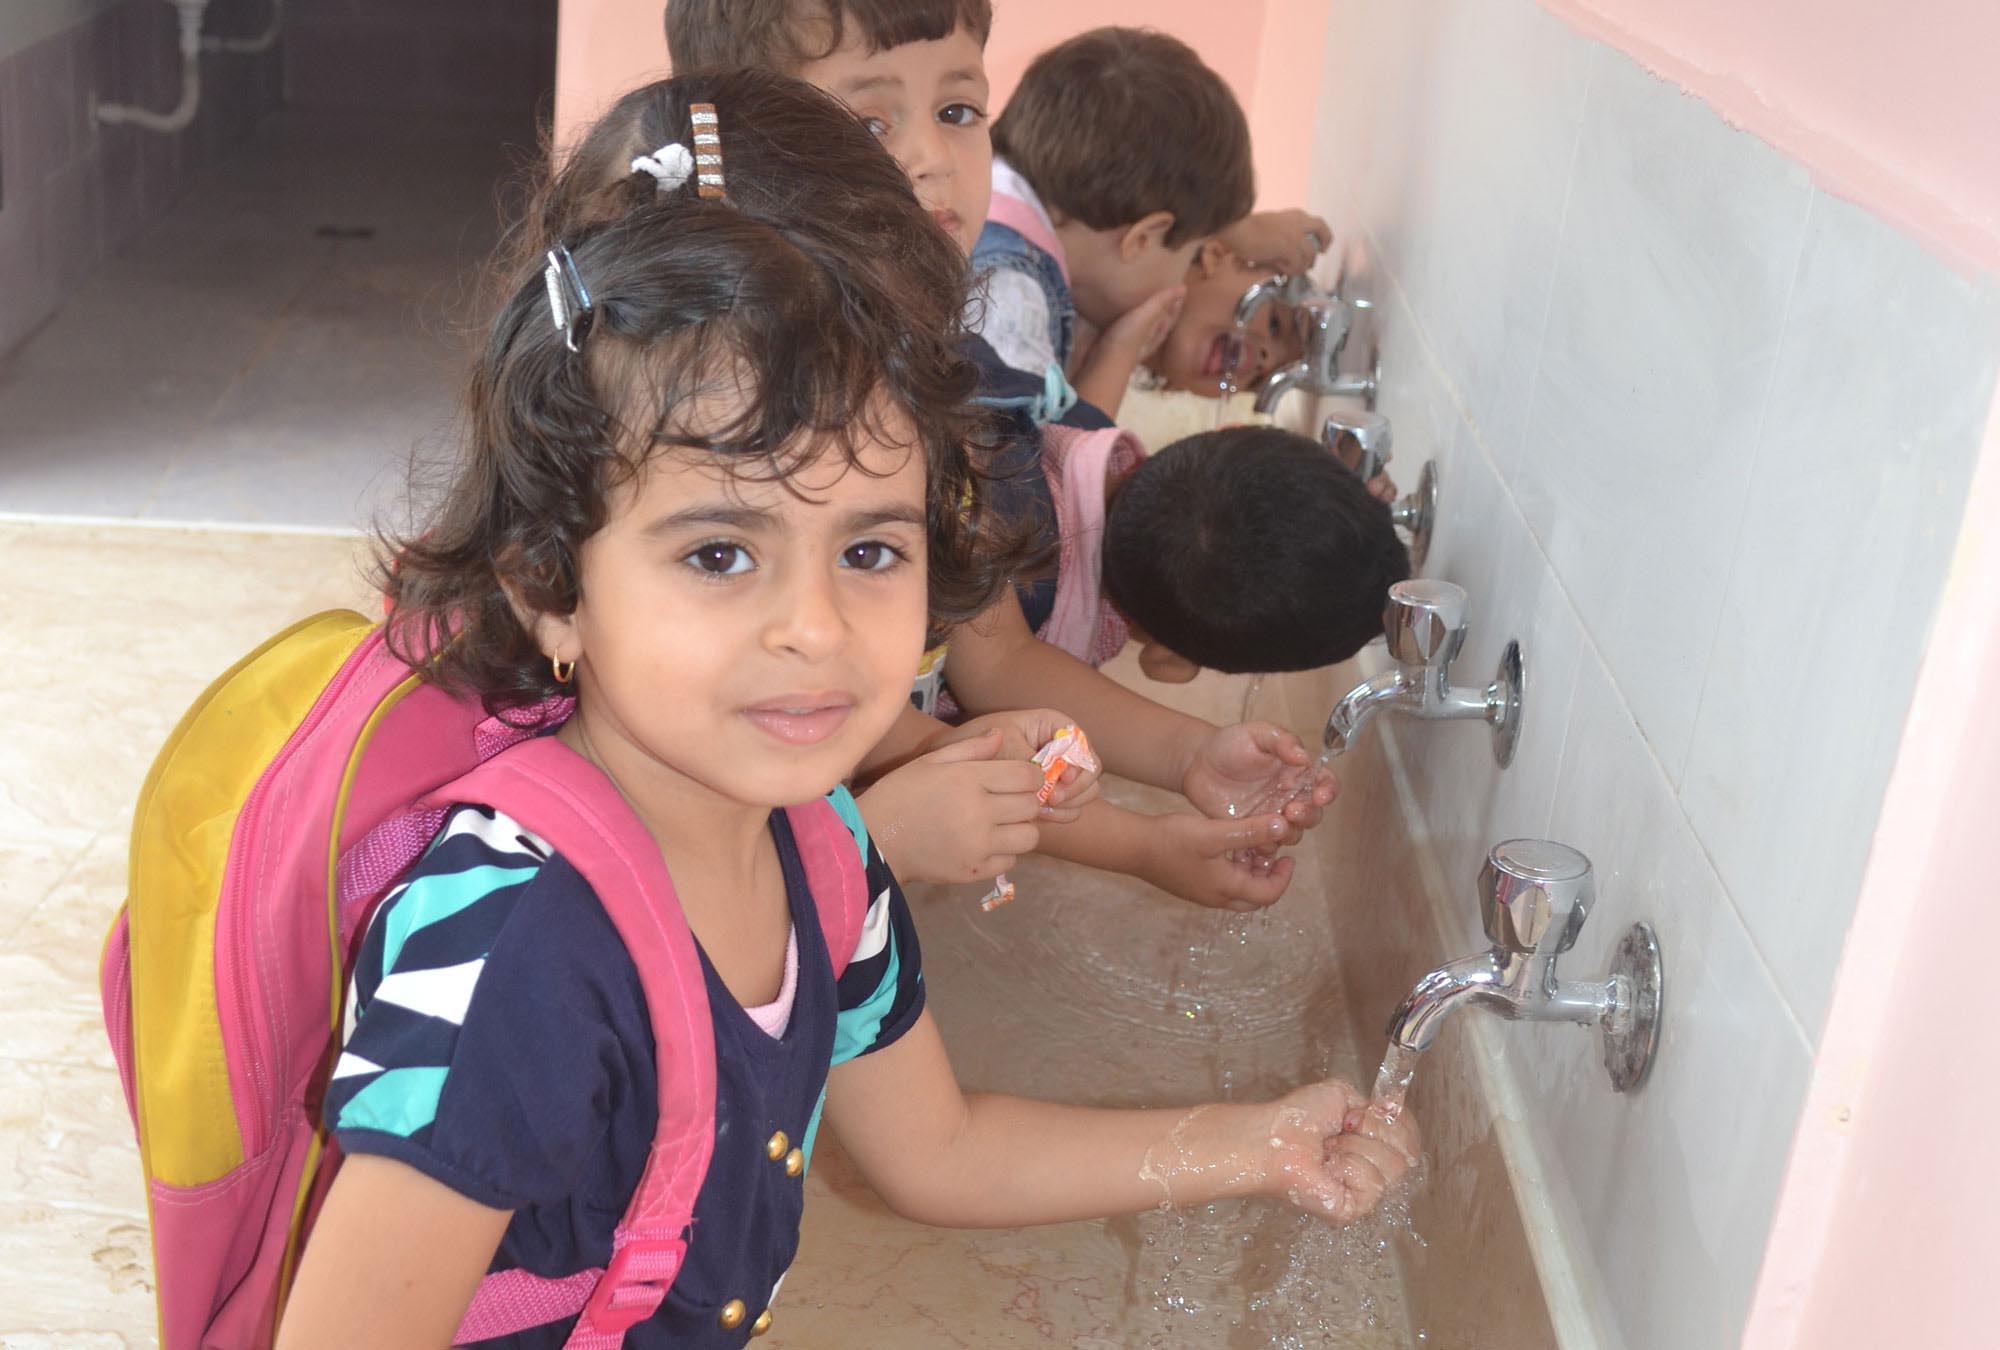 Youngsters enjoy washing hands at the new sinks Anera installed in their Gaza preschool.